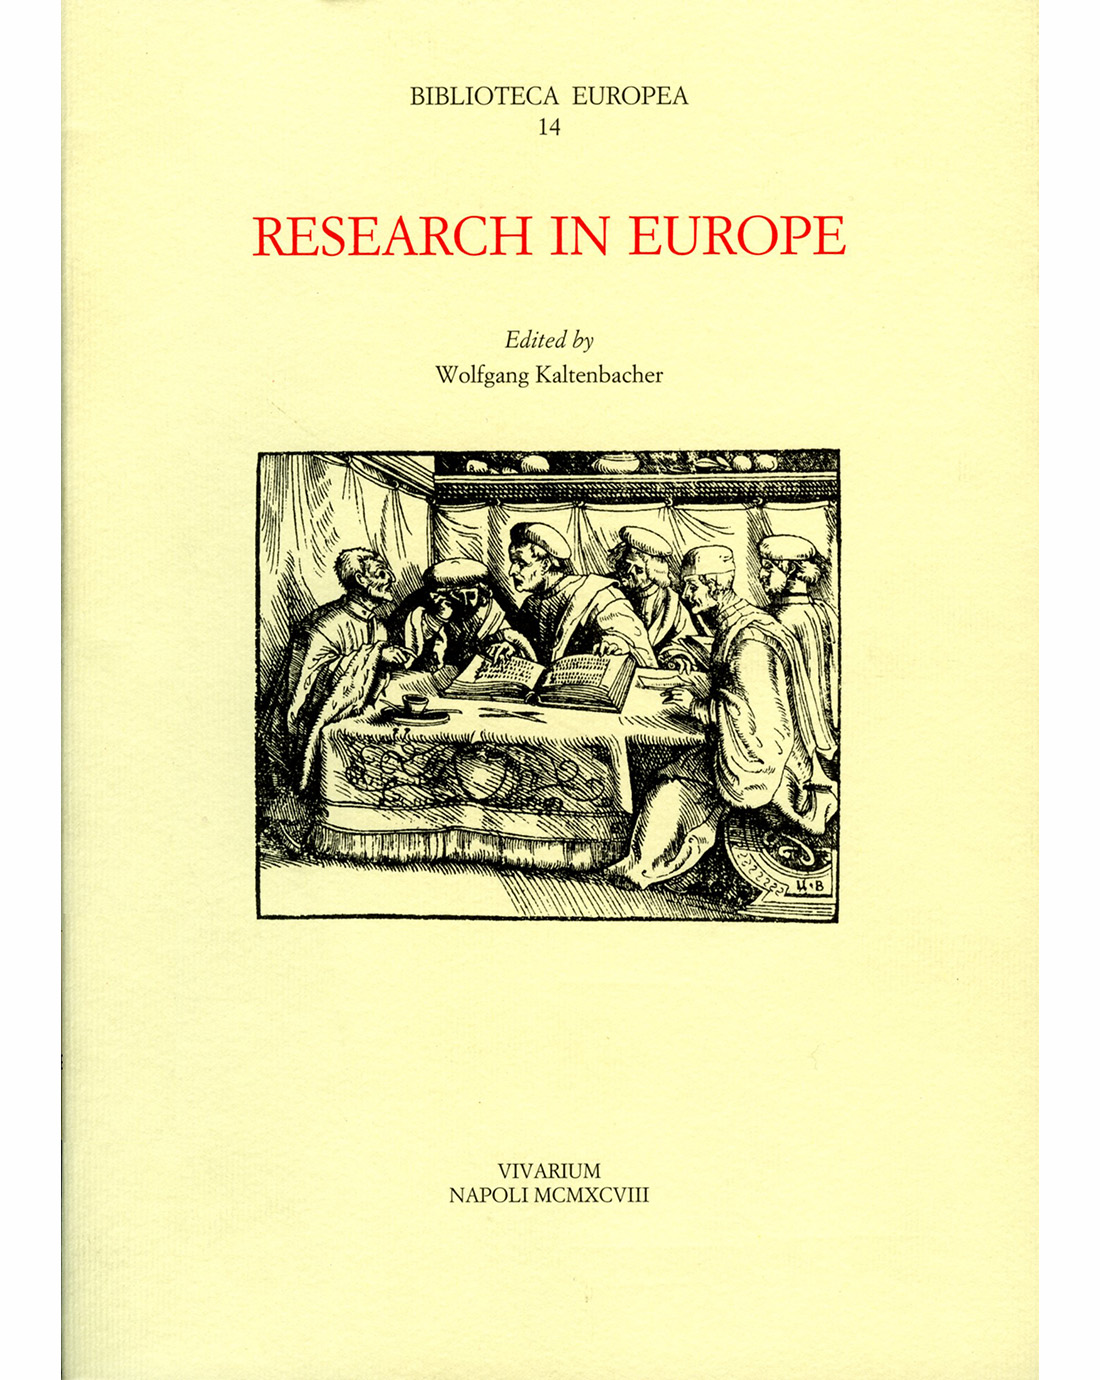 Research in Europe